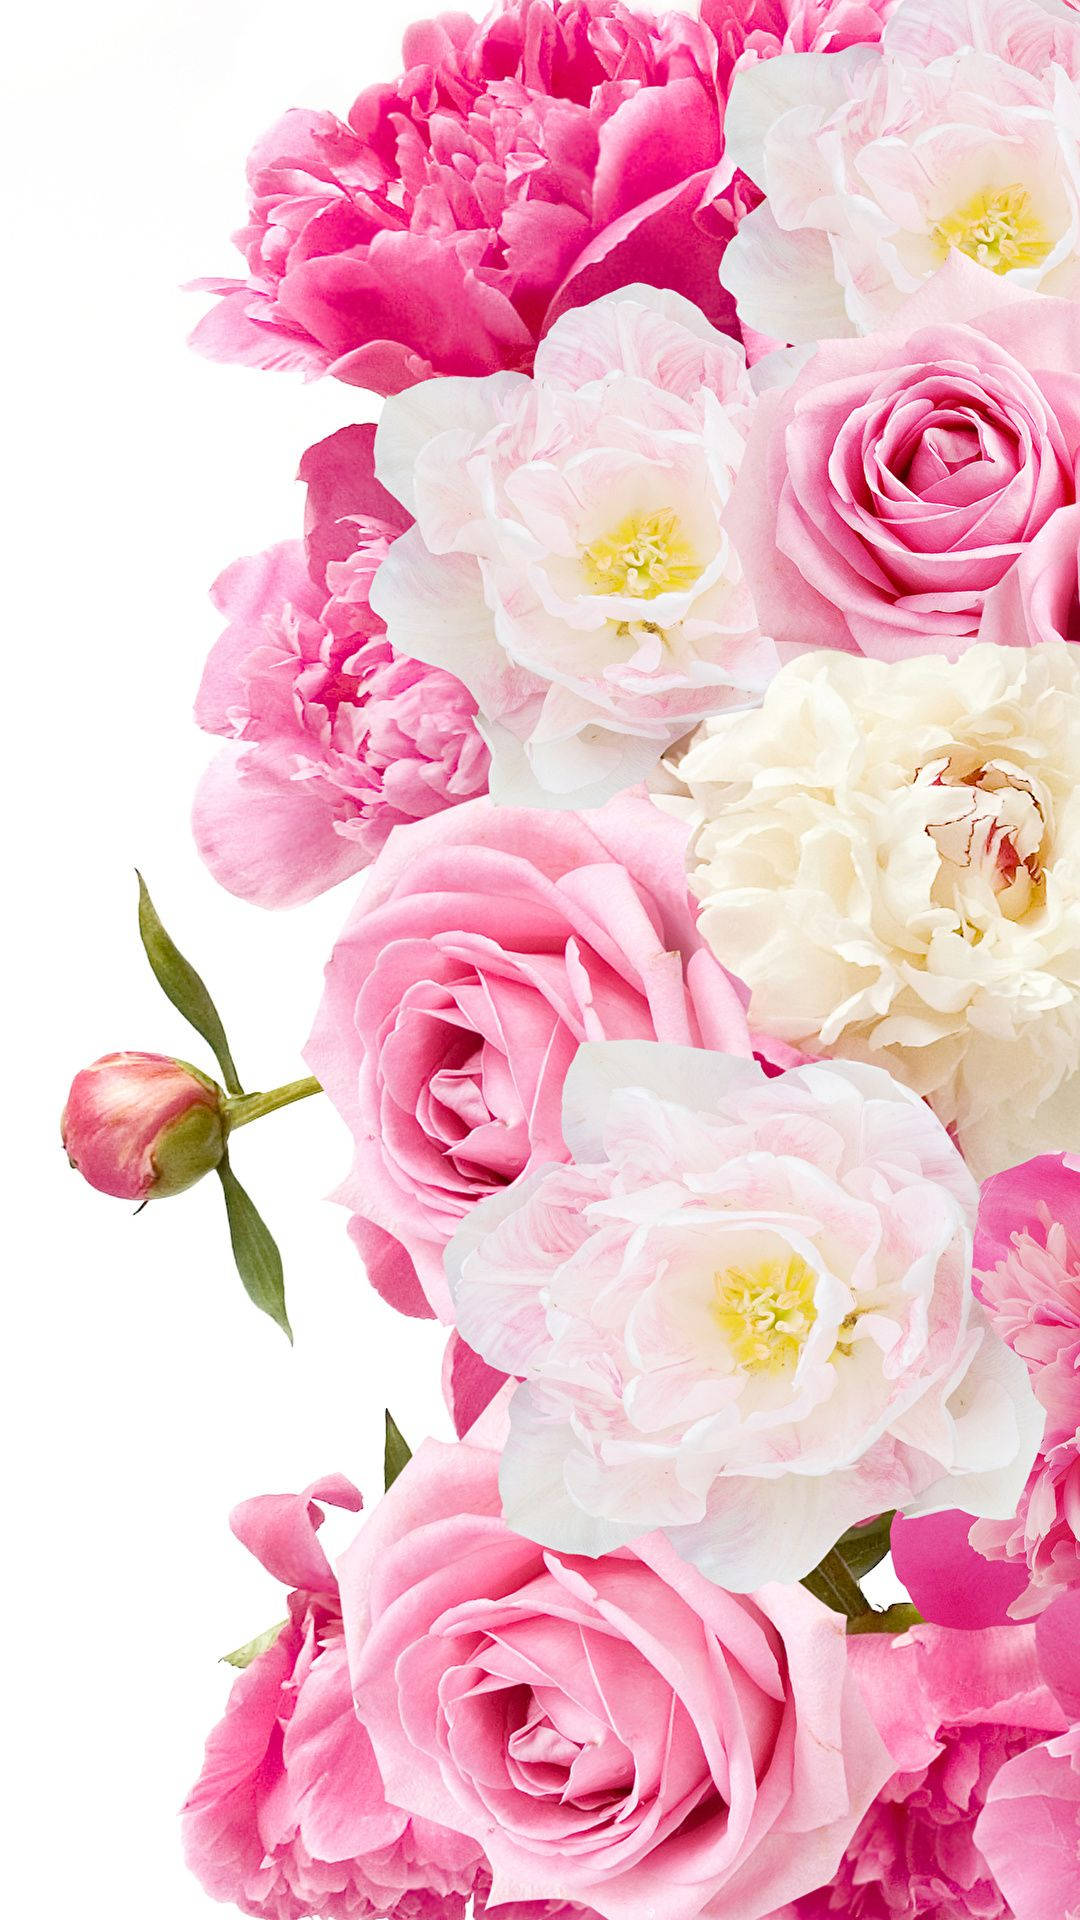 Peony With Other Pink Flowers Wallpaper